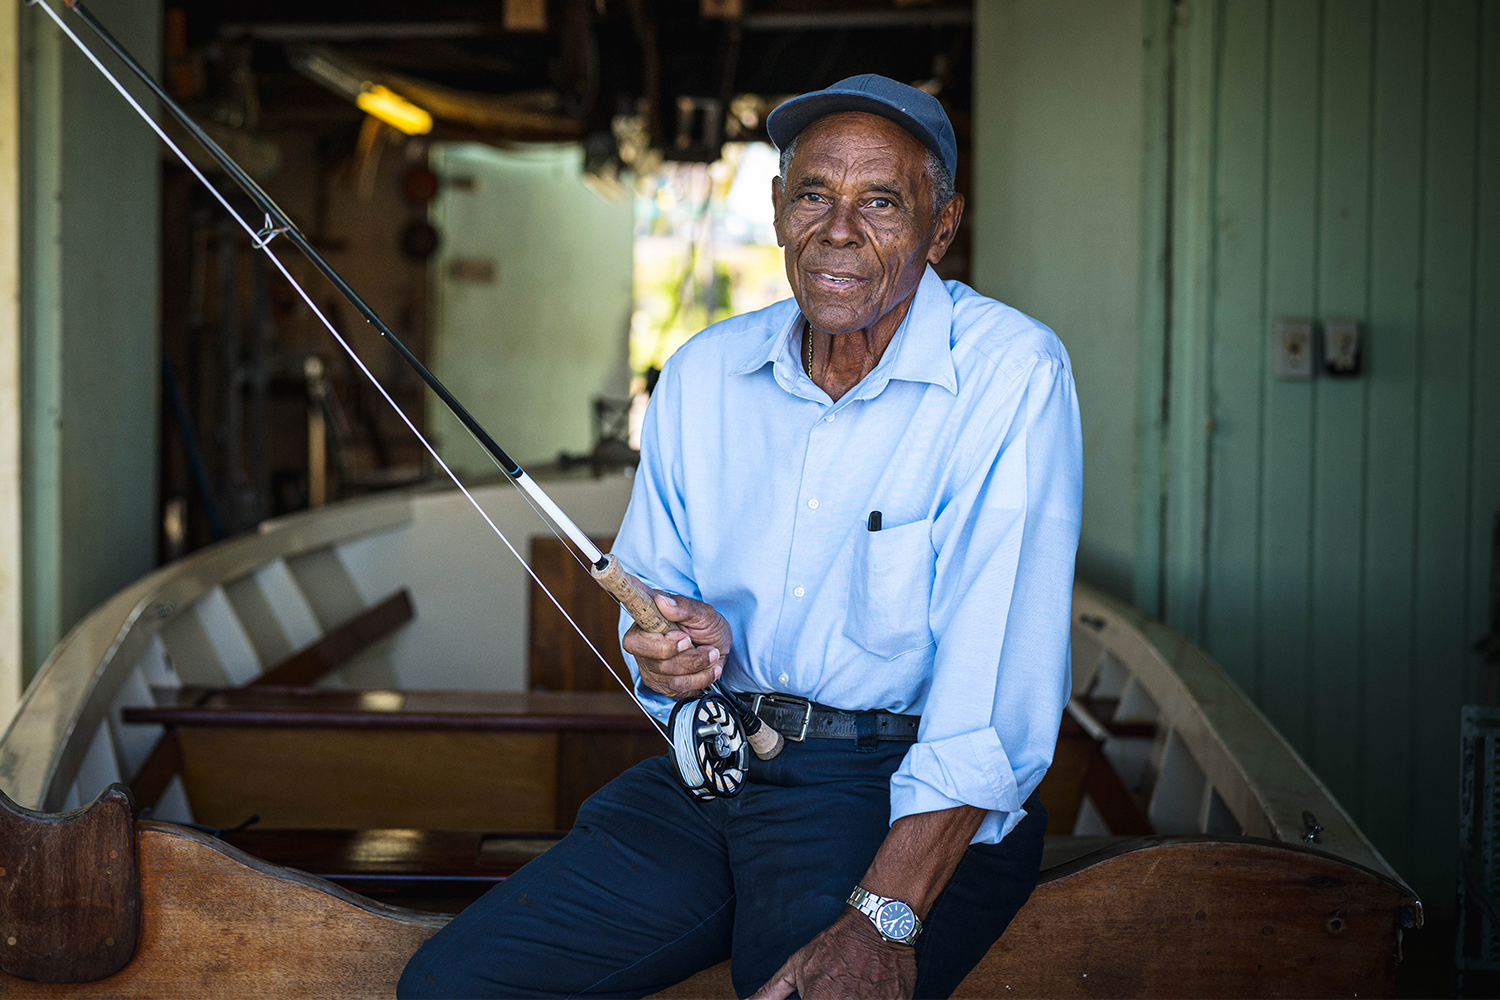 Fly fishing guide Ansil Saunders holds a fishing rod on Bimini